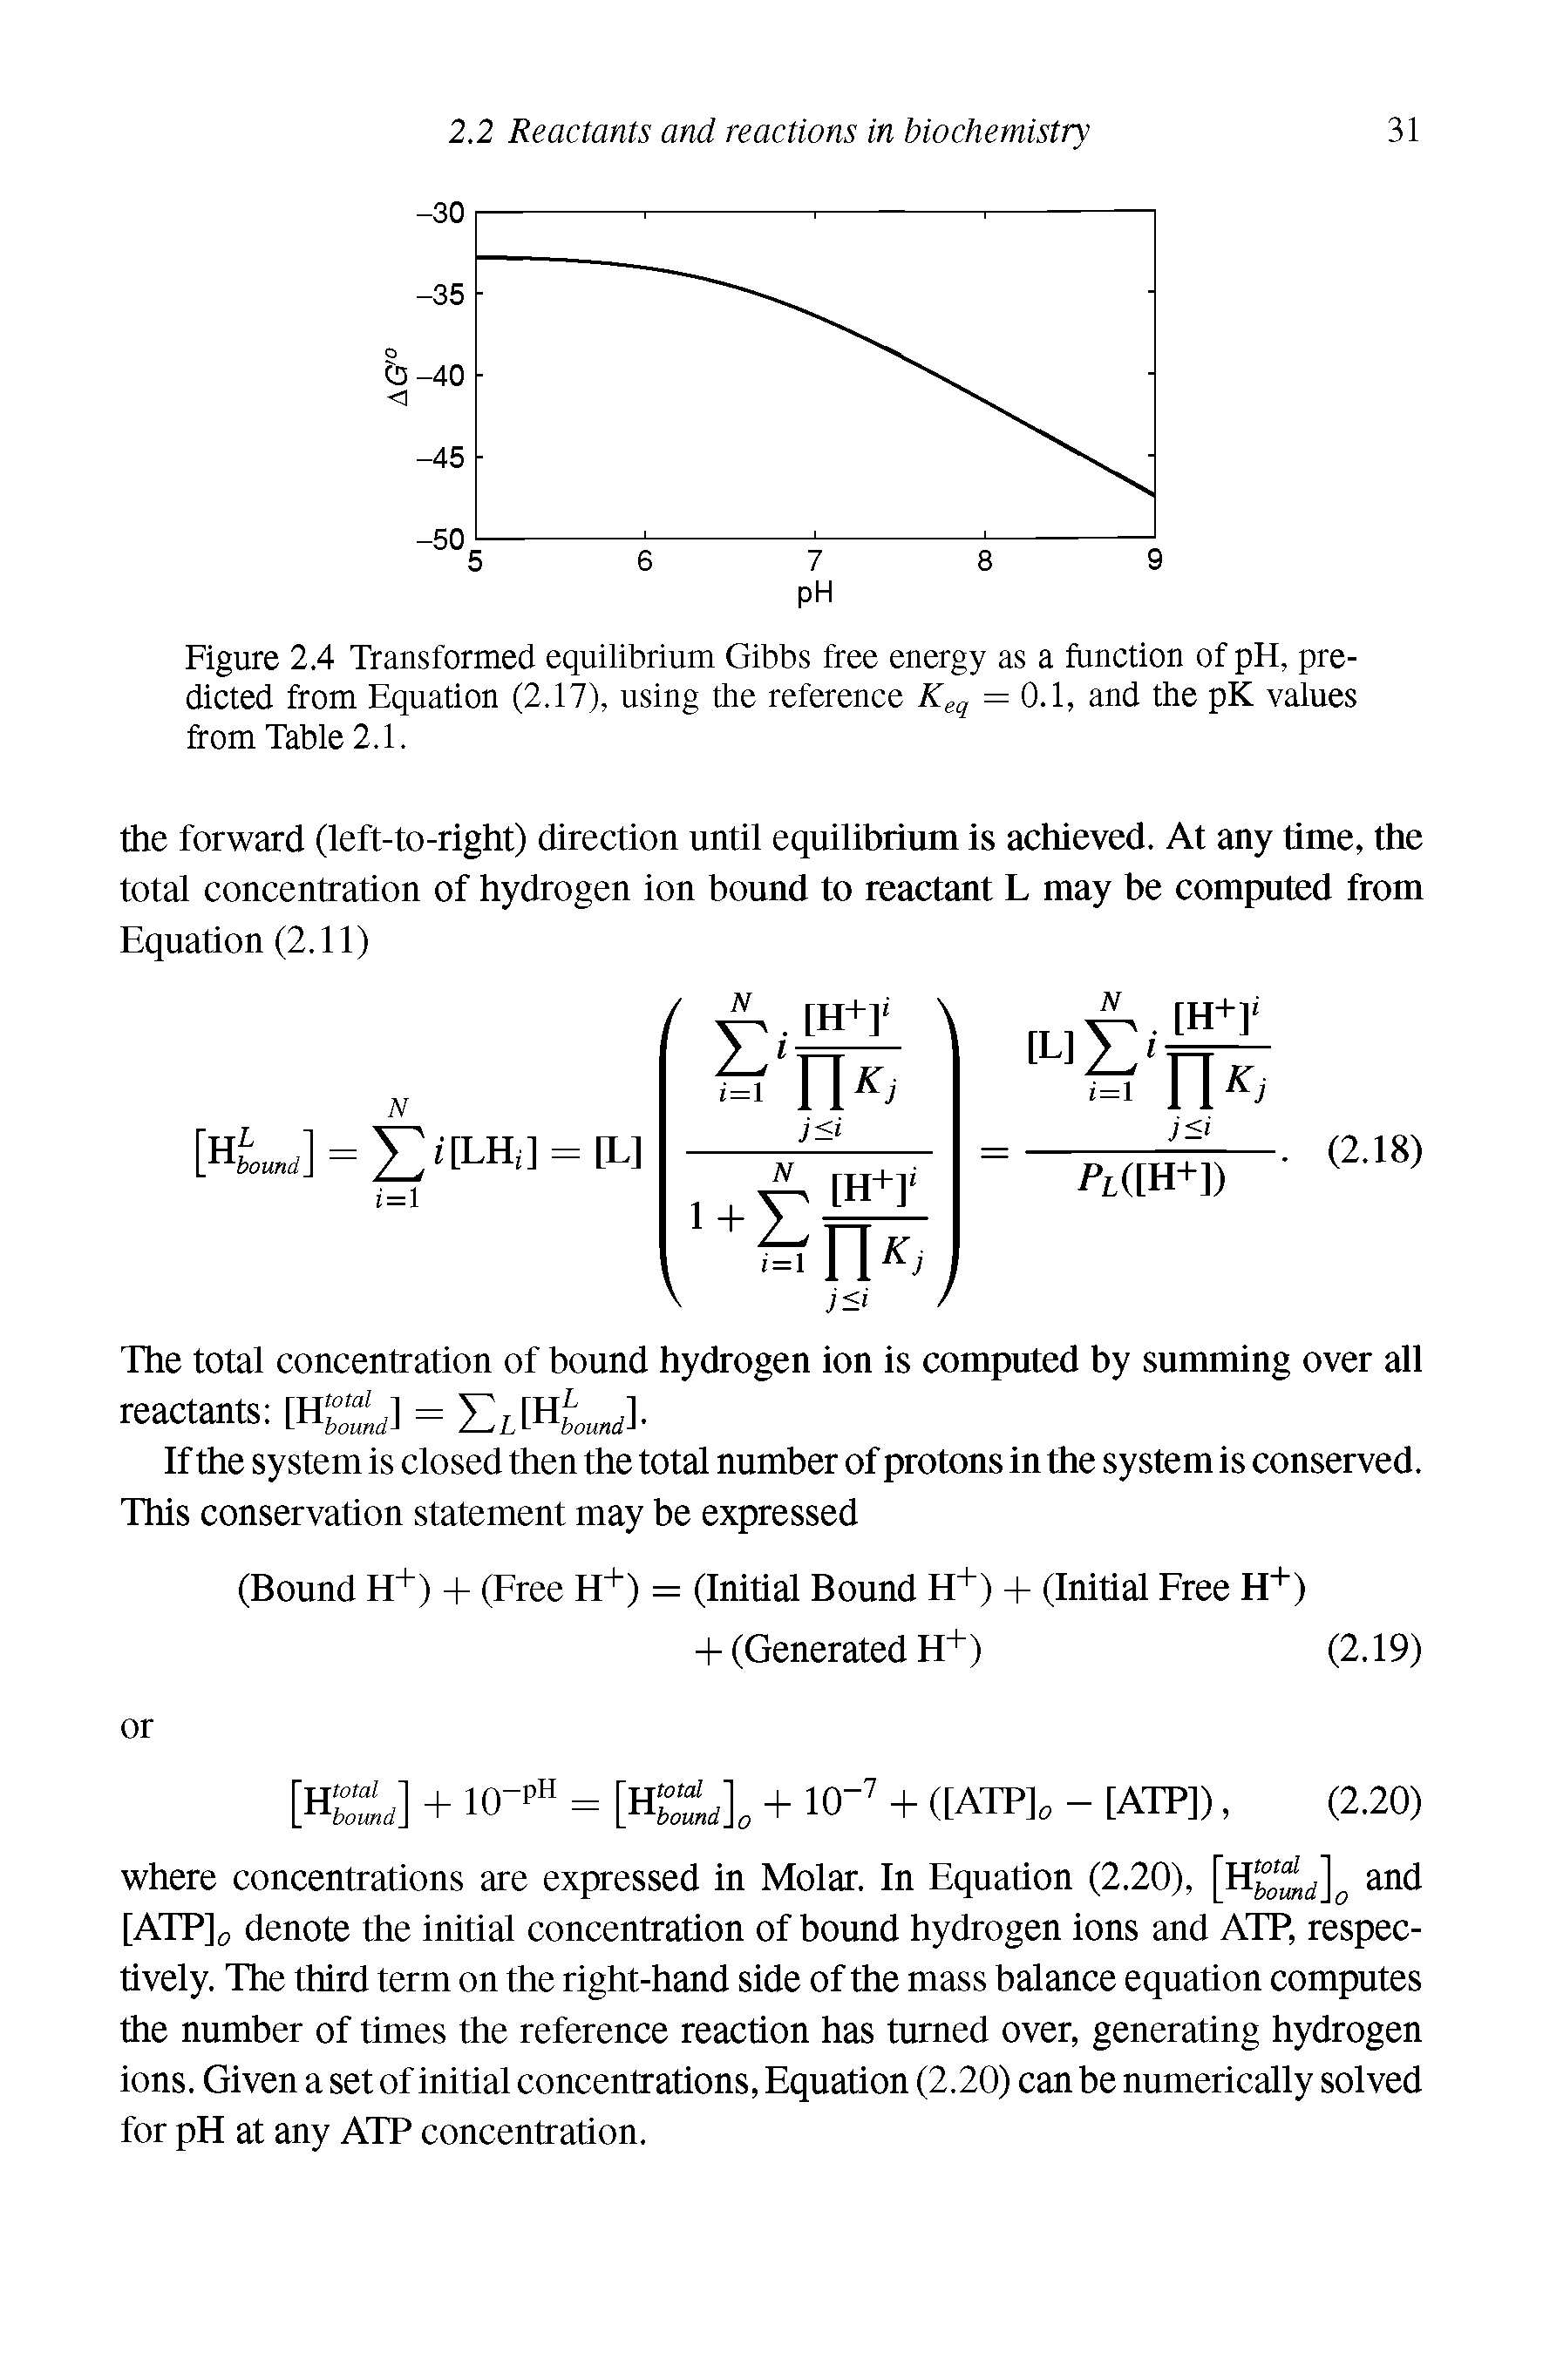 Figure 2.4 Transformed equilibrium Gibbs free energy as a function of pH, predicted from Equation (2.17), using the reference Keq = 0.1, and the pK values from Table 2.1.